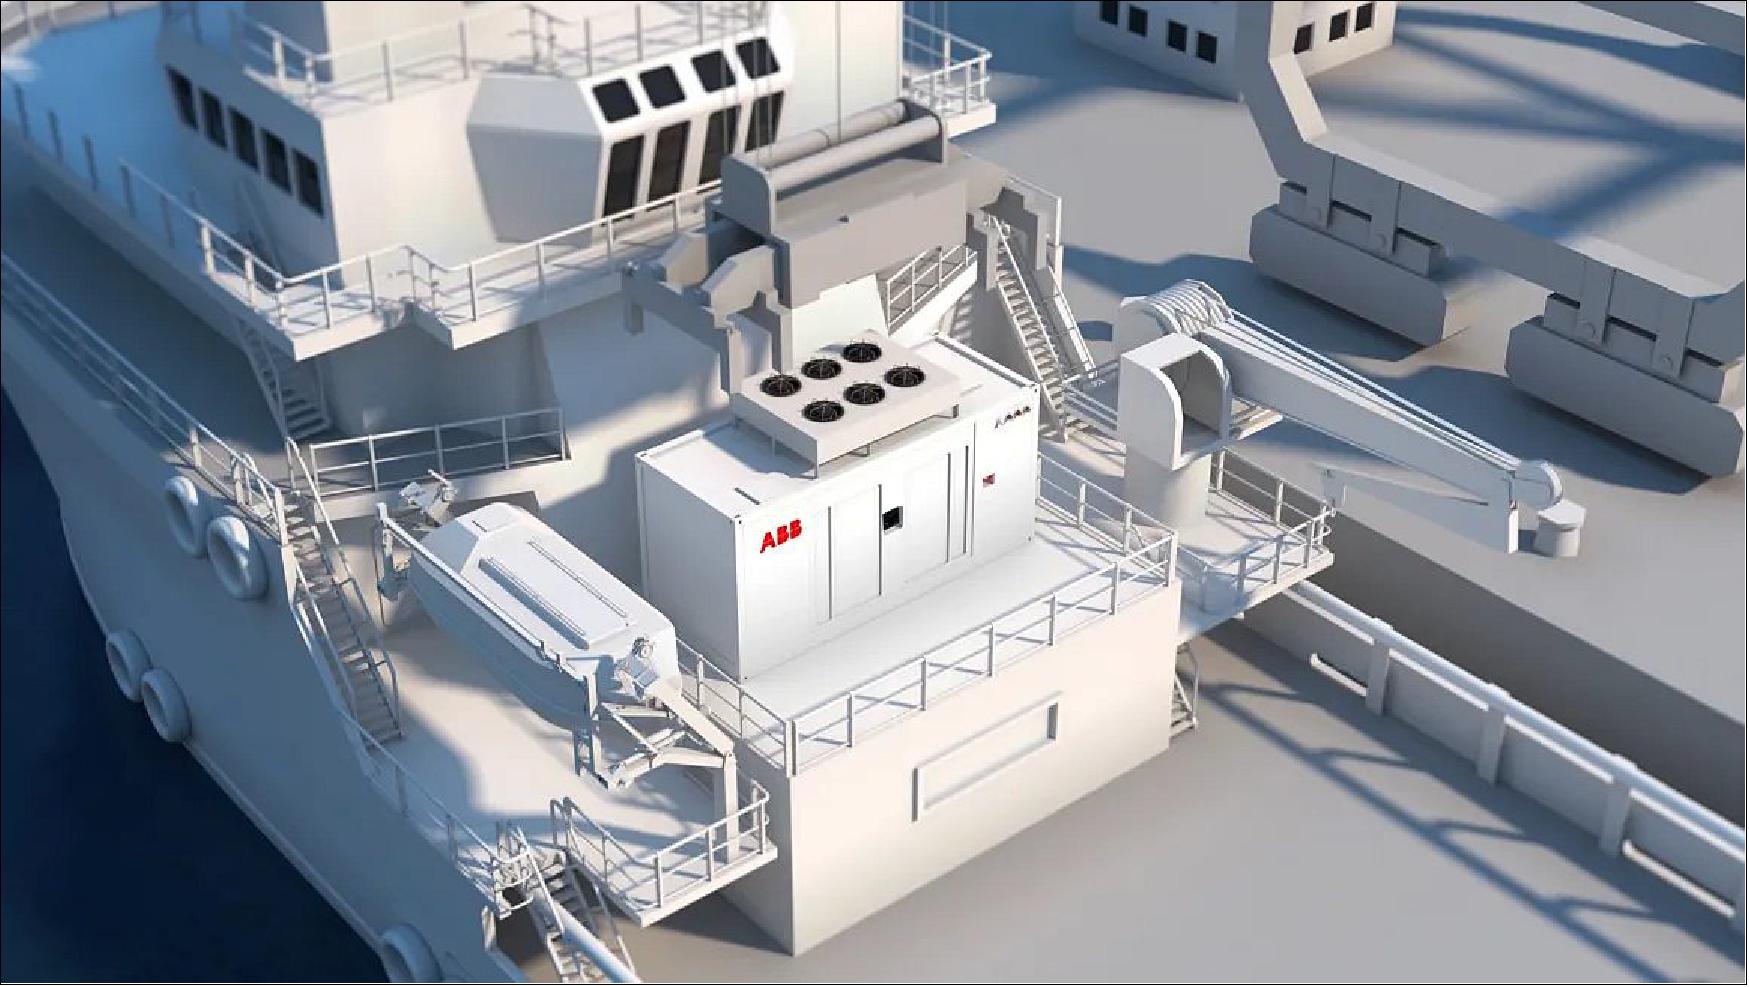 Figure 148: ABB’s containerized ESS (Energy Storage System) integrates battery power in a standard 20 ft container (image credit: ABB)